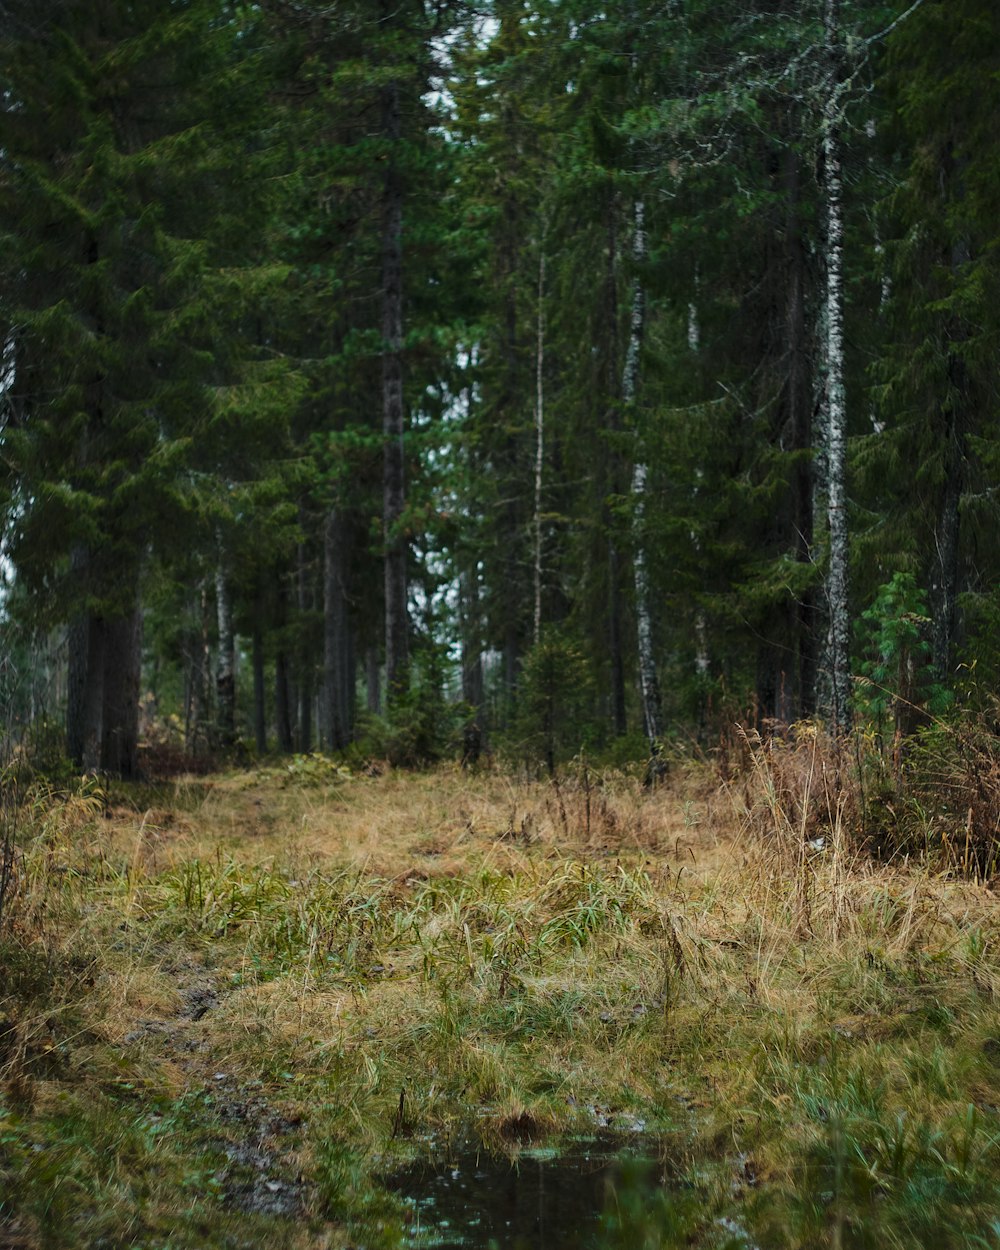 a black bear walking through a forest filled with trees